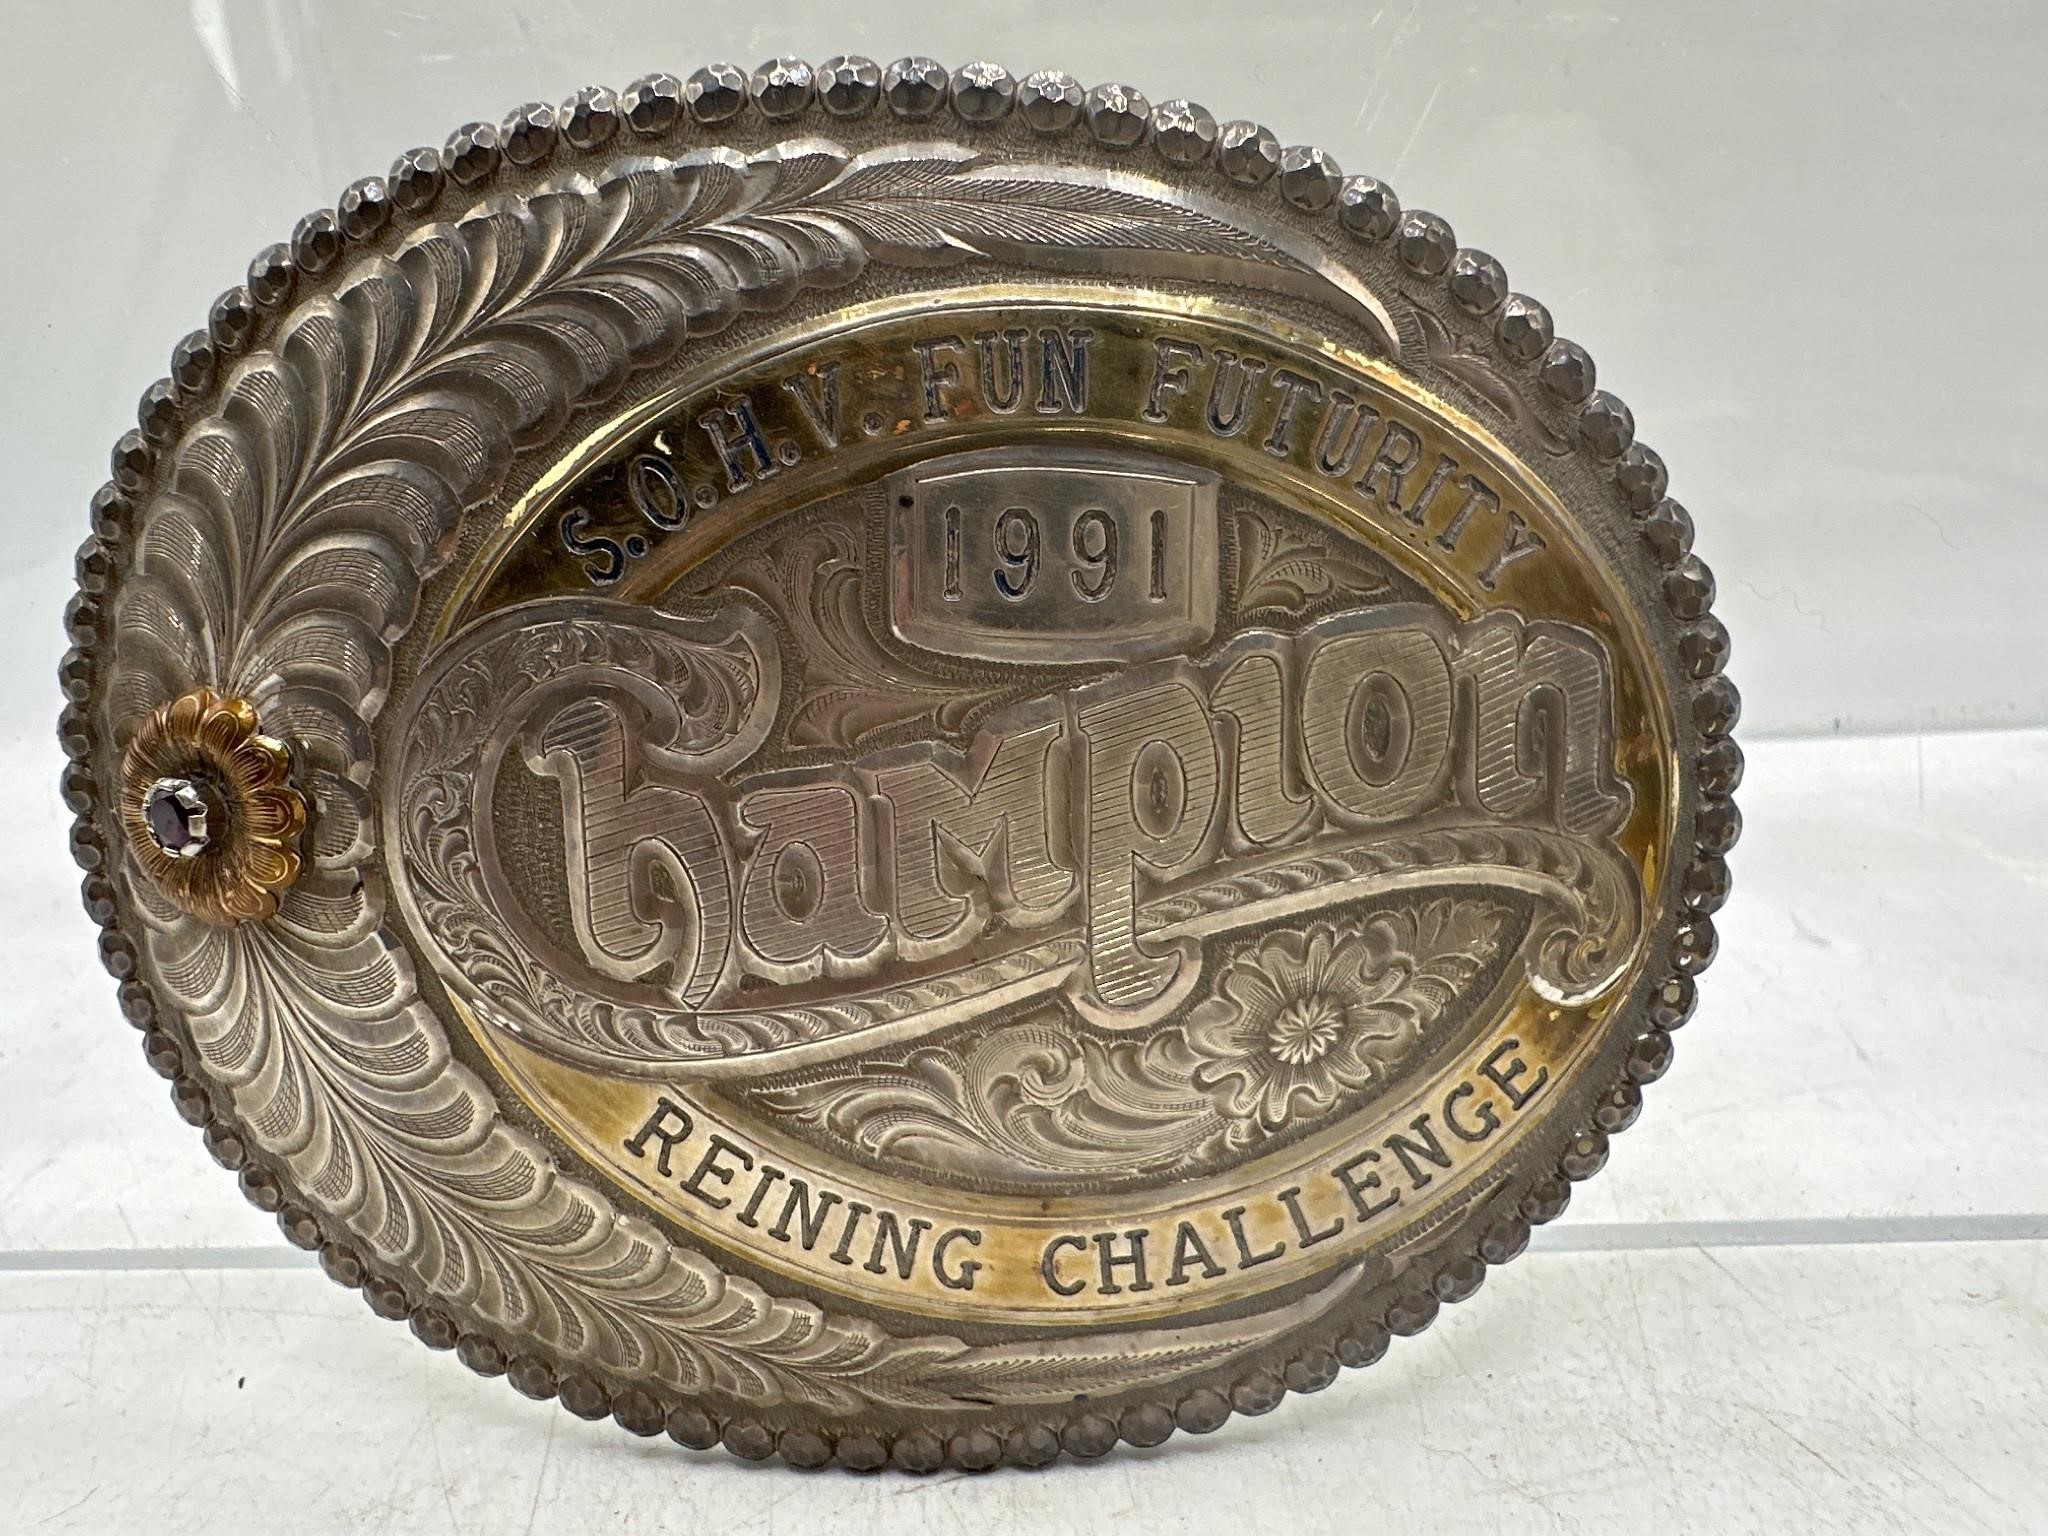 Sterling overlay champion reining challenge buckle